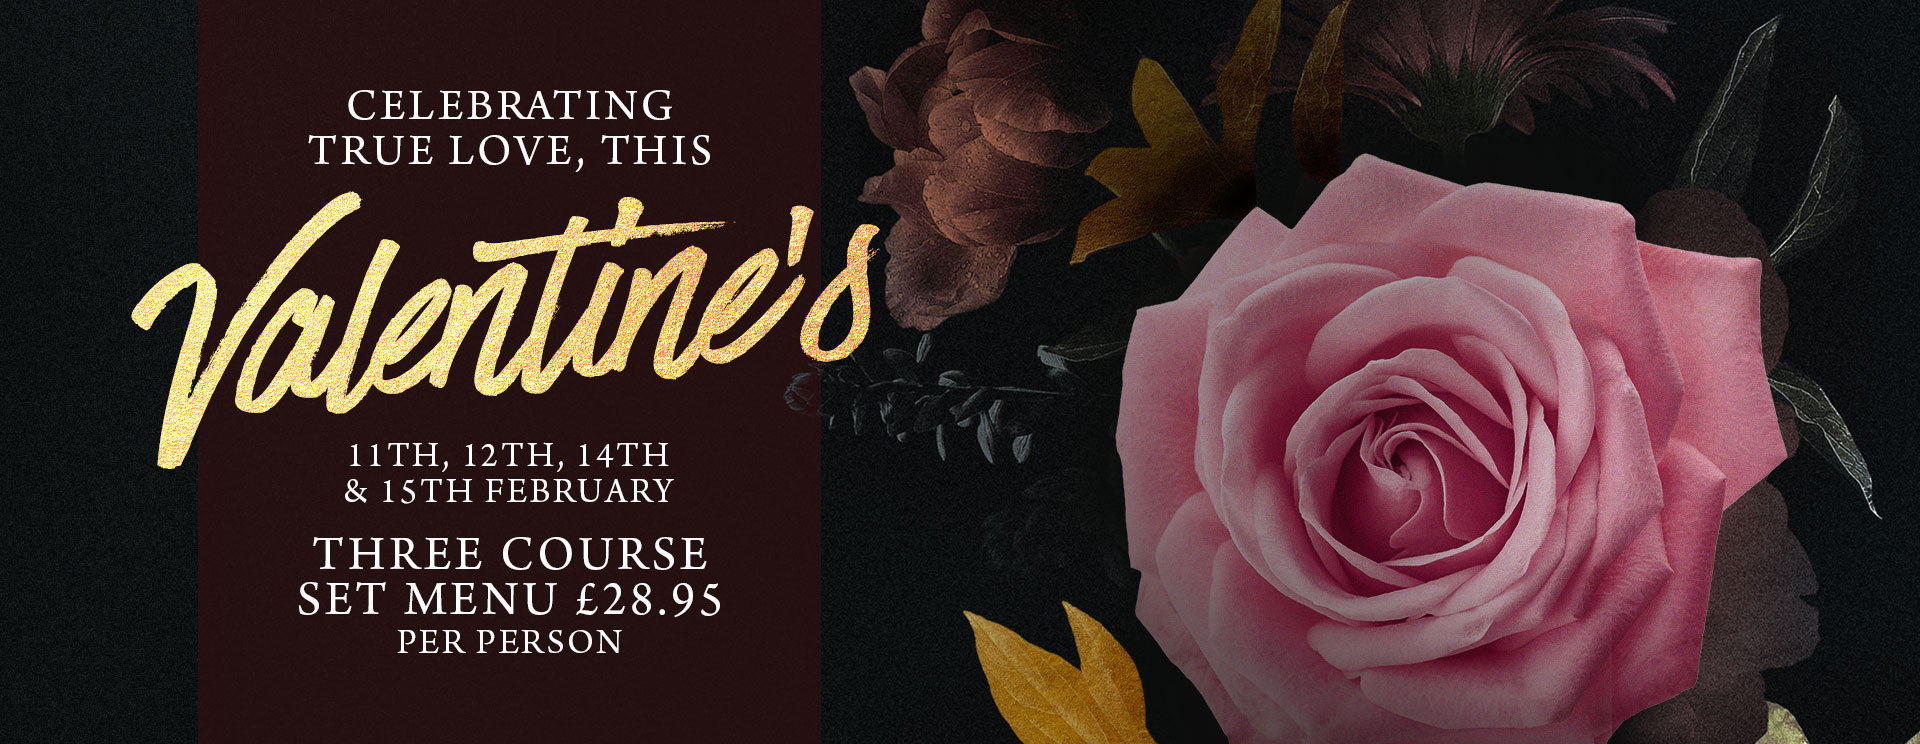 Valentines at The Flying Horse